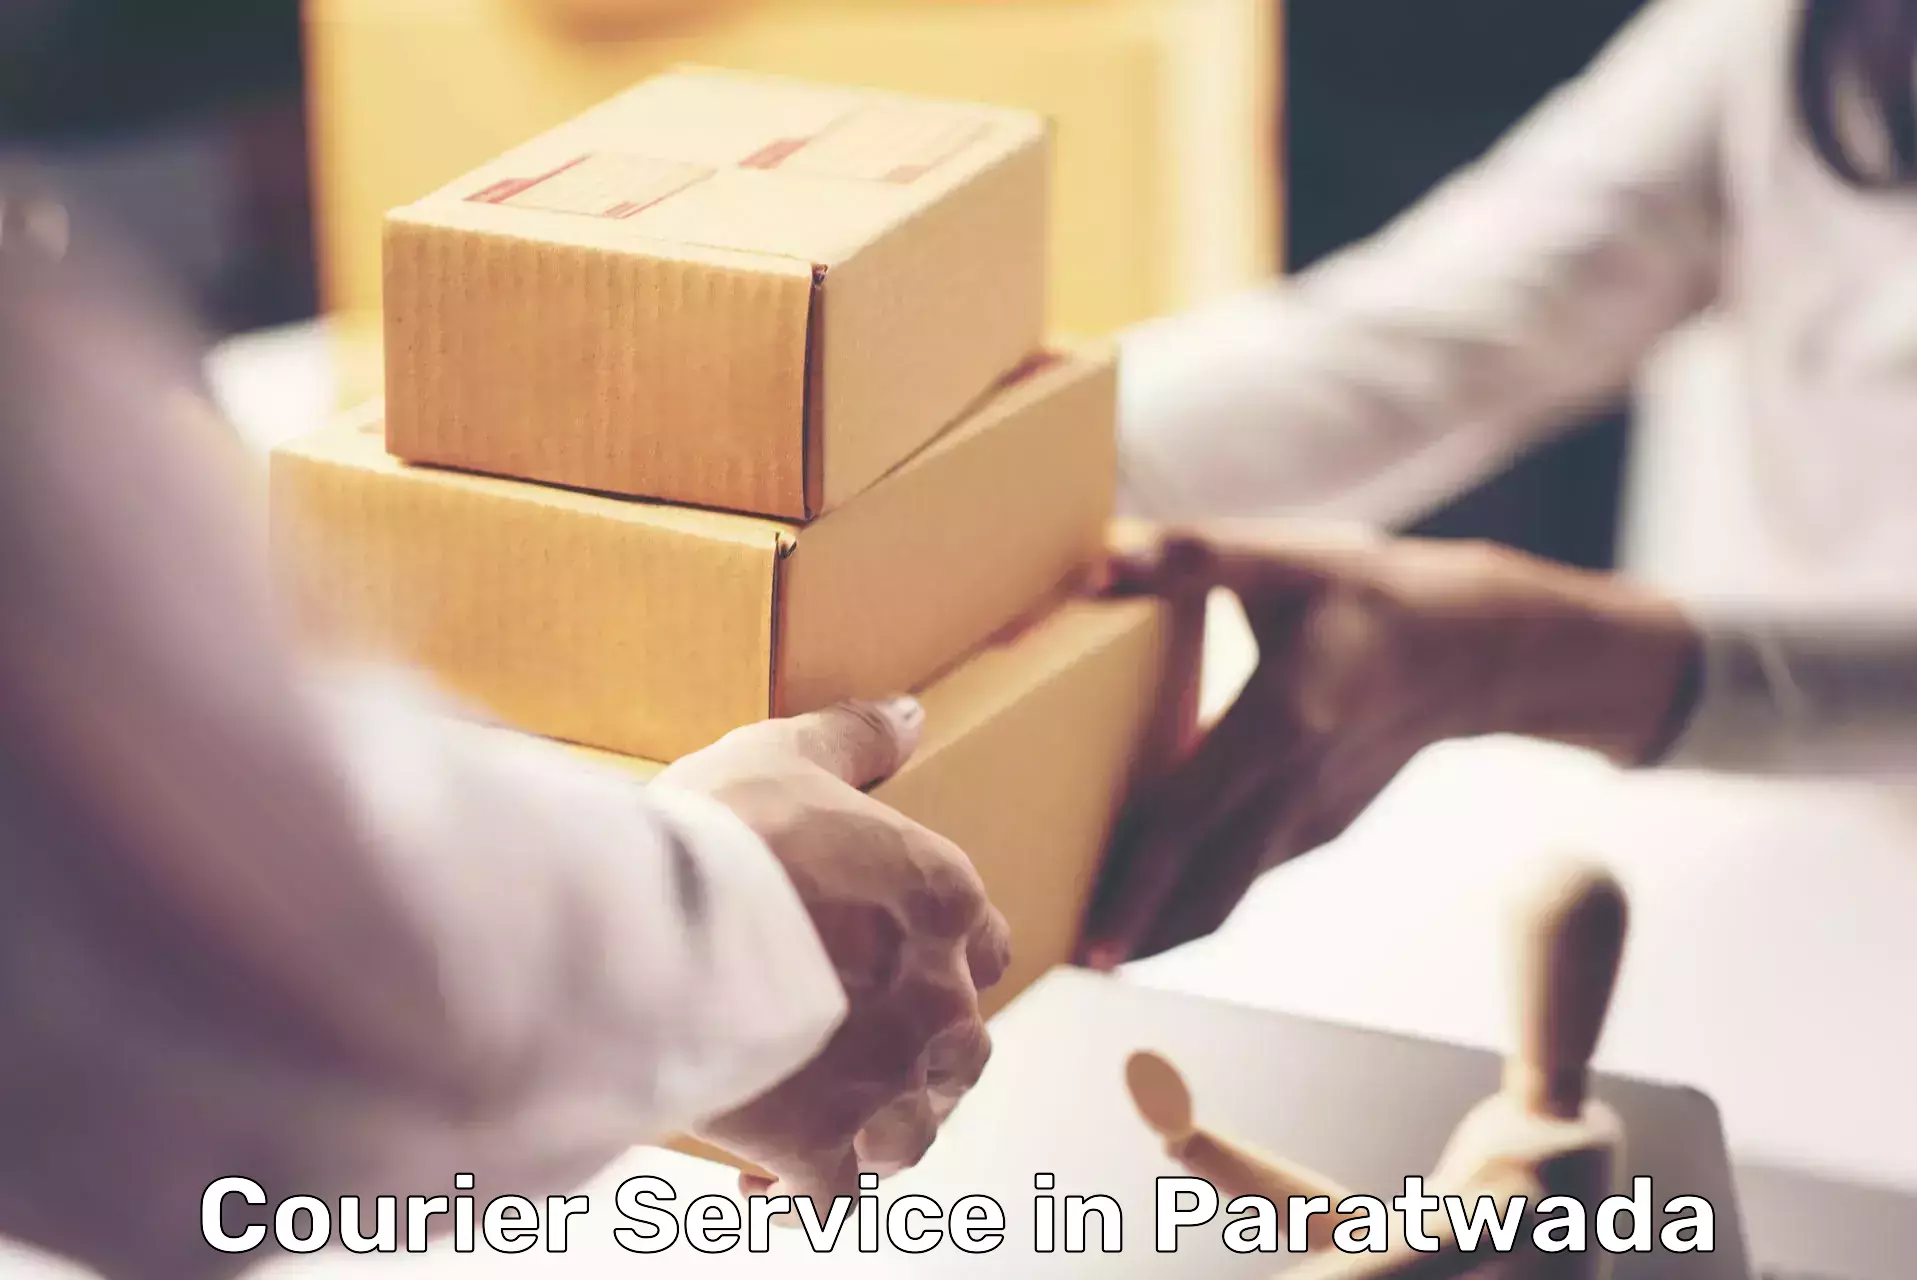 Express postal services in Paratwada